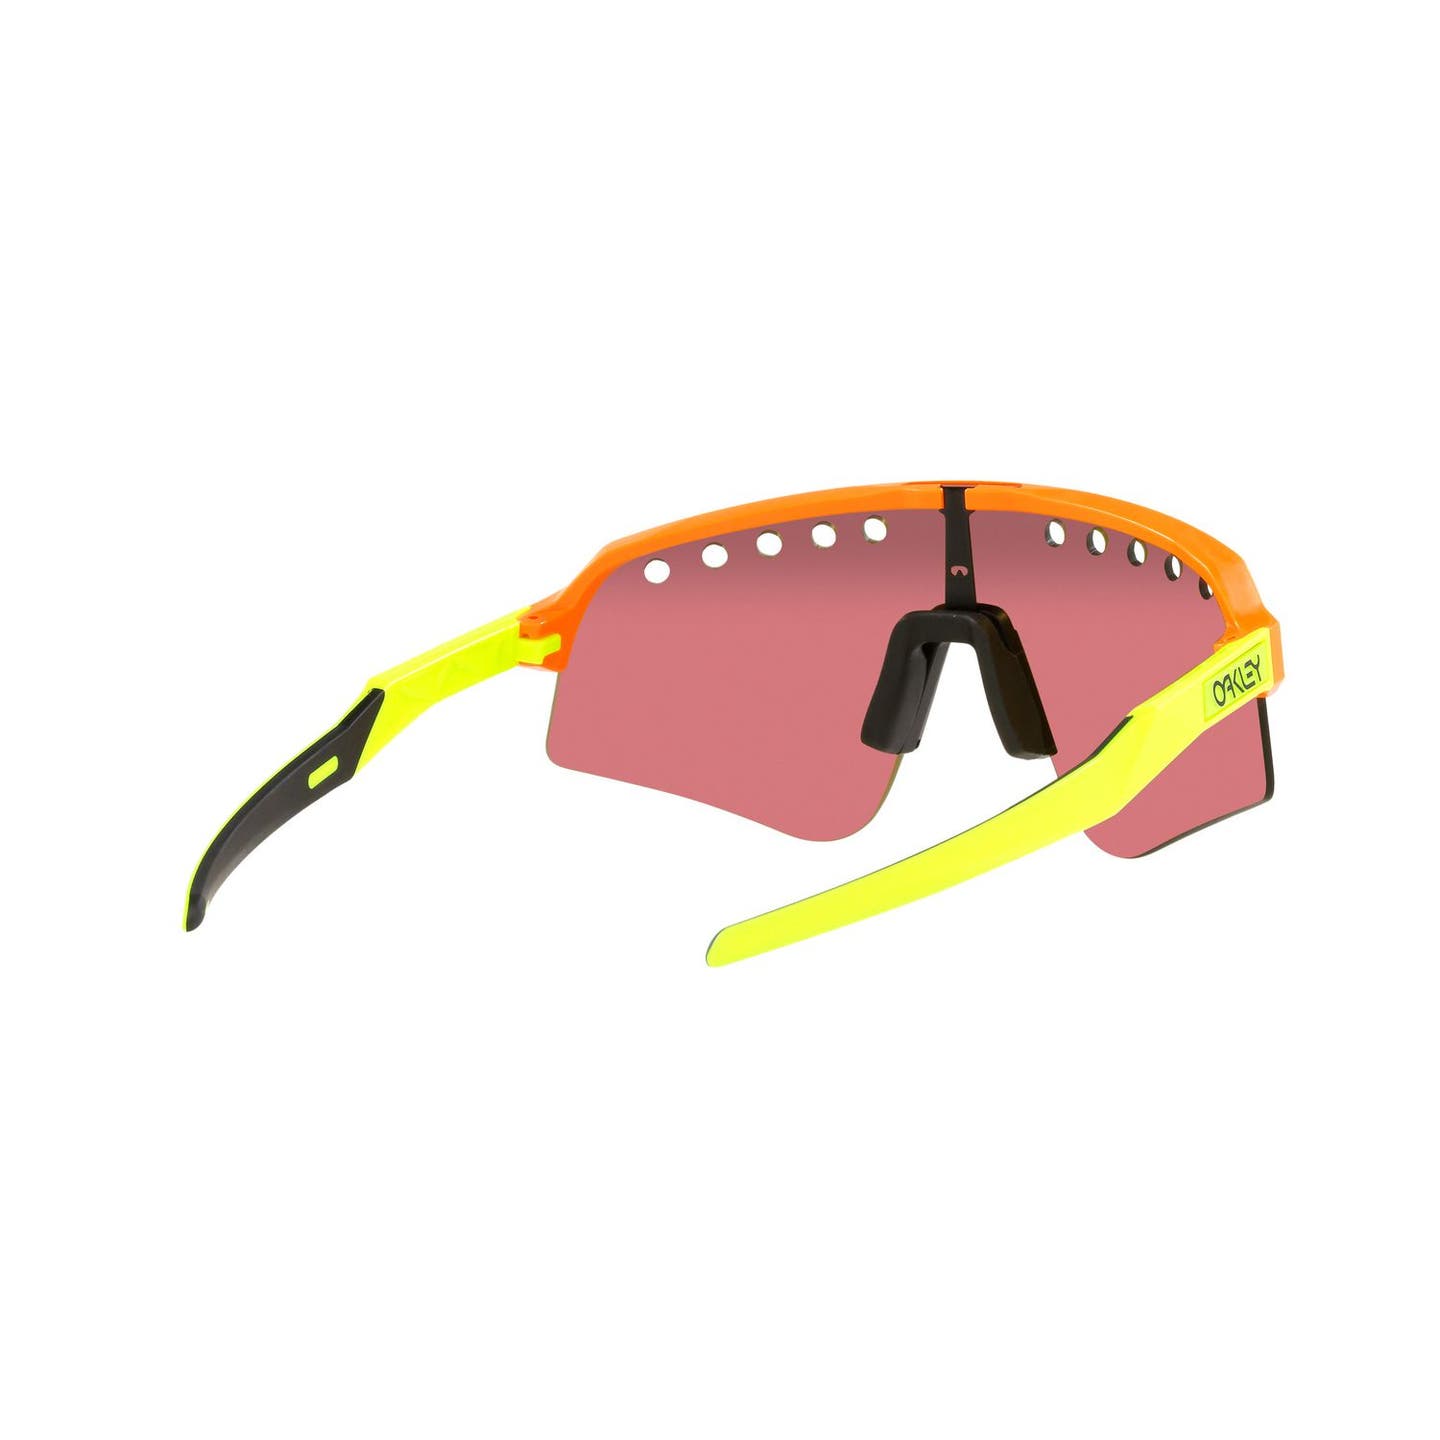 OAKLEY® SUTRO LITE SWEEP MATTE ORANGE/TENNIS BALL YELLOW WITH PRIZM™ TRAIL TORCH VENTED LENSES